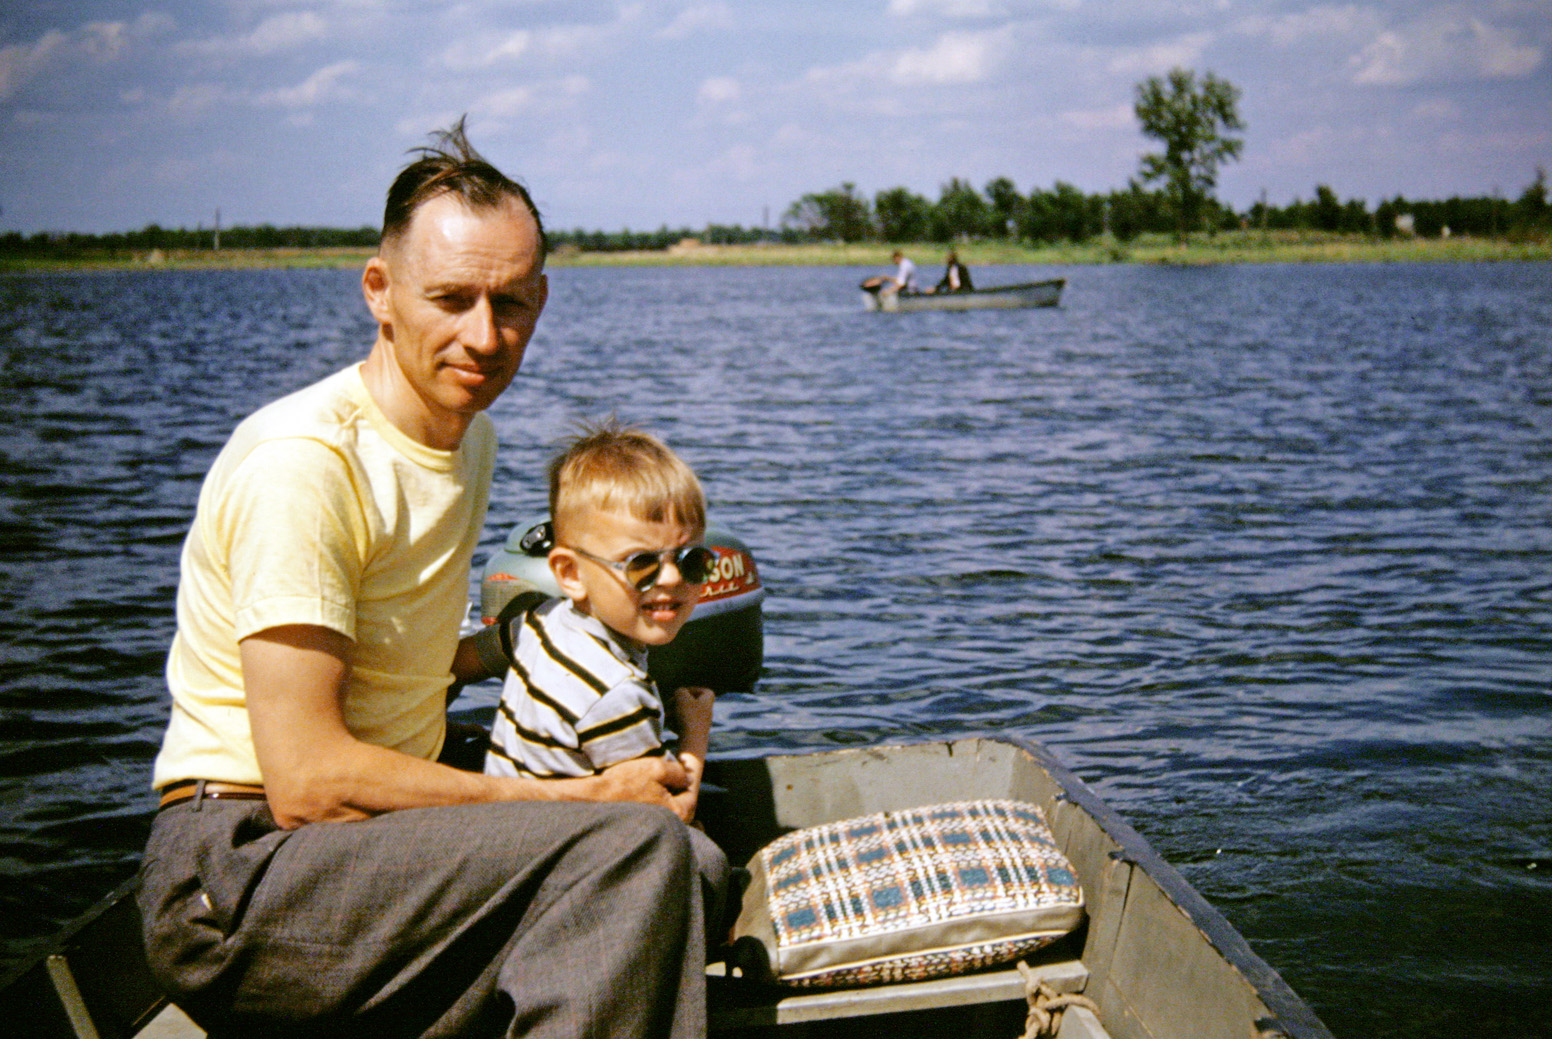 On a fishing trip with my dad, c.1950 somewhere in Minnesota. My dad bought that 2.5 hp Johnson motor from a co-worker at the printing plant where he worked; he sold it back to the same co-worker over 20 years later for exactly what he paid for it, and upgraded to a new 7 hp Johnson. American made. View full size.